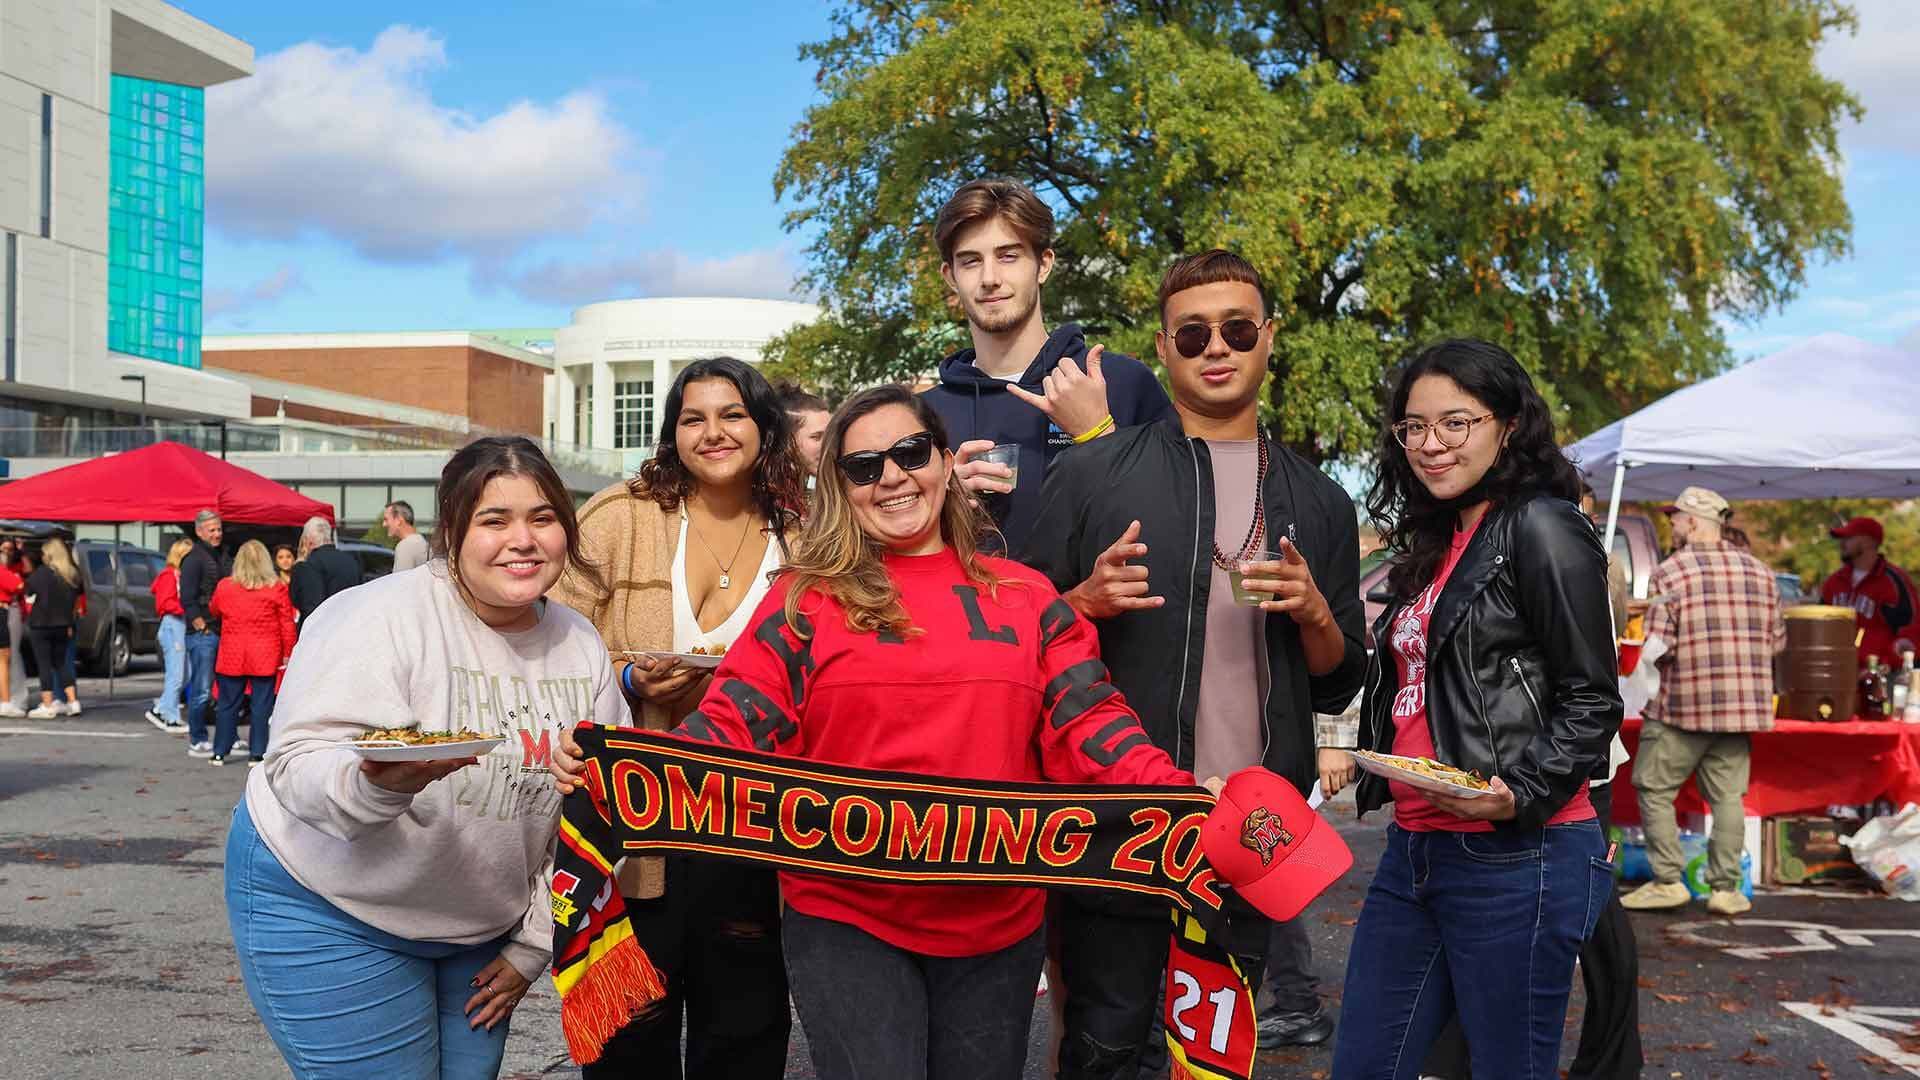 students celebrate homecoming and unfurl a homecoming scarf near the IDEA Factory building